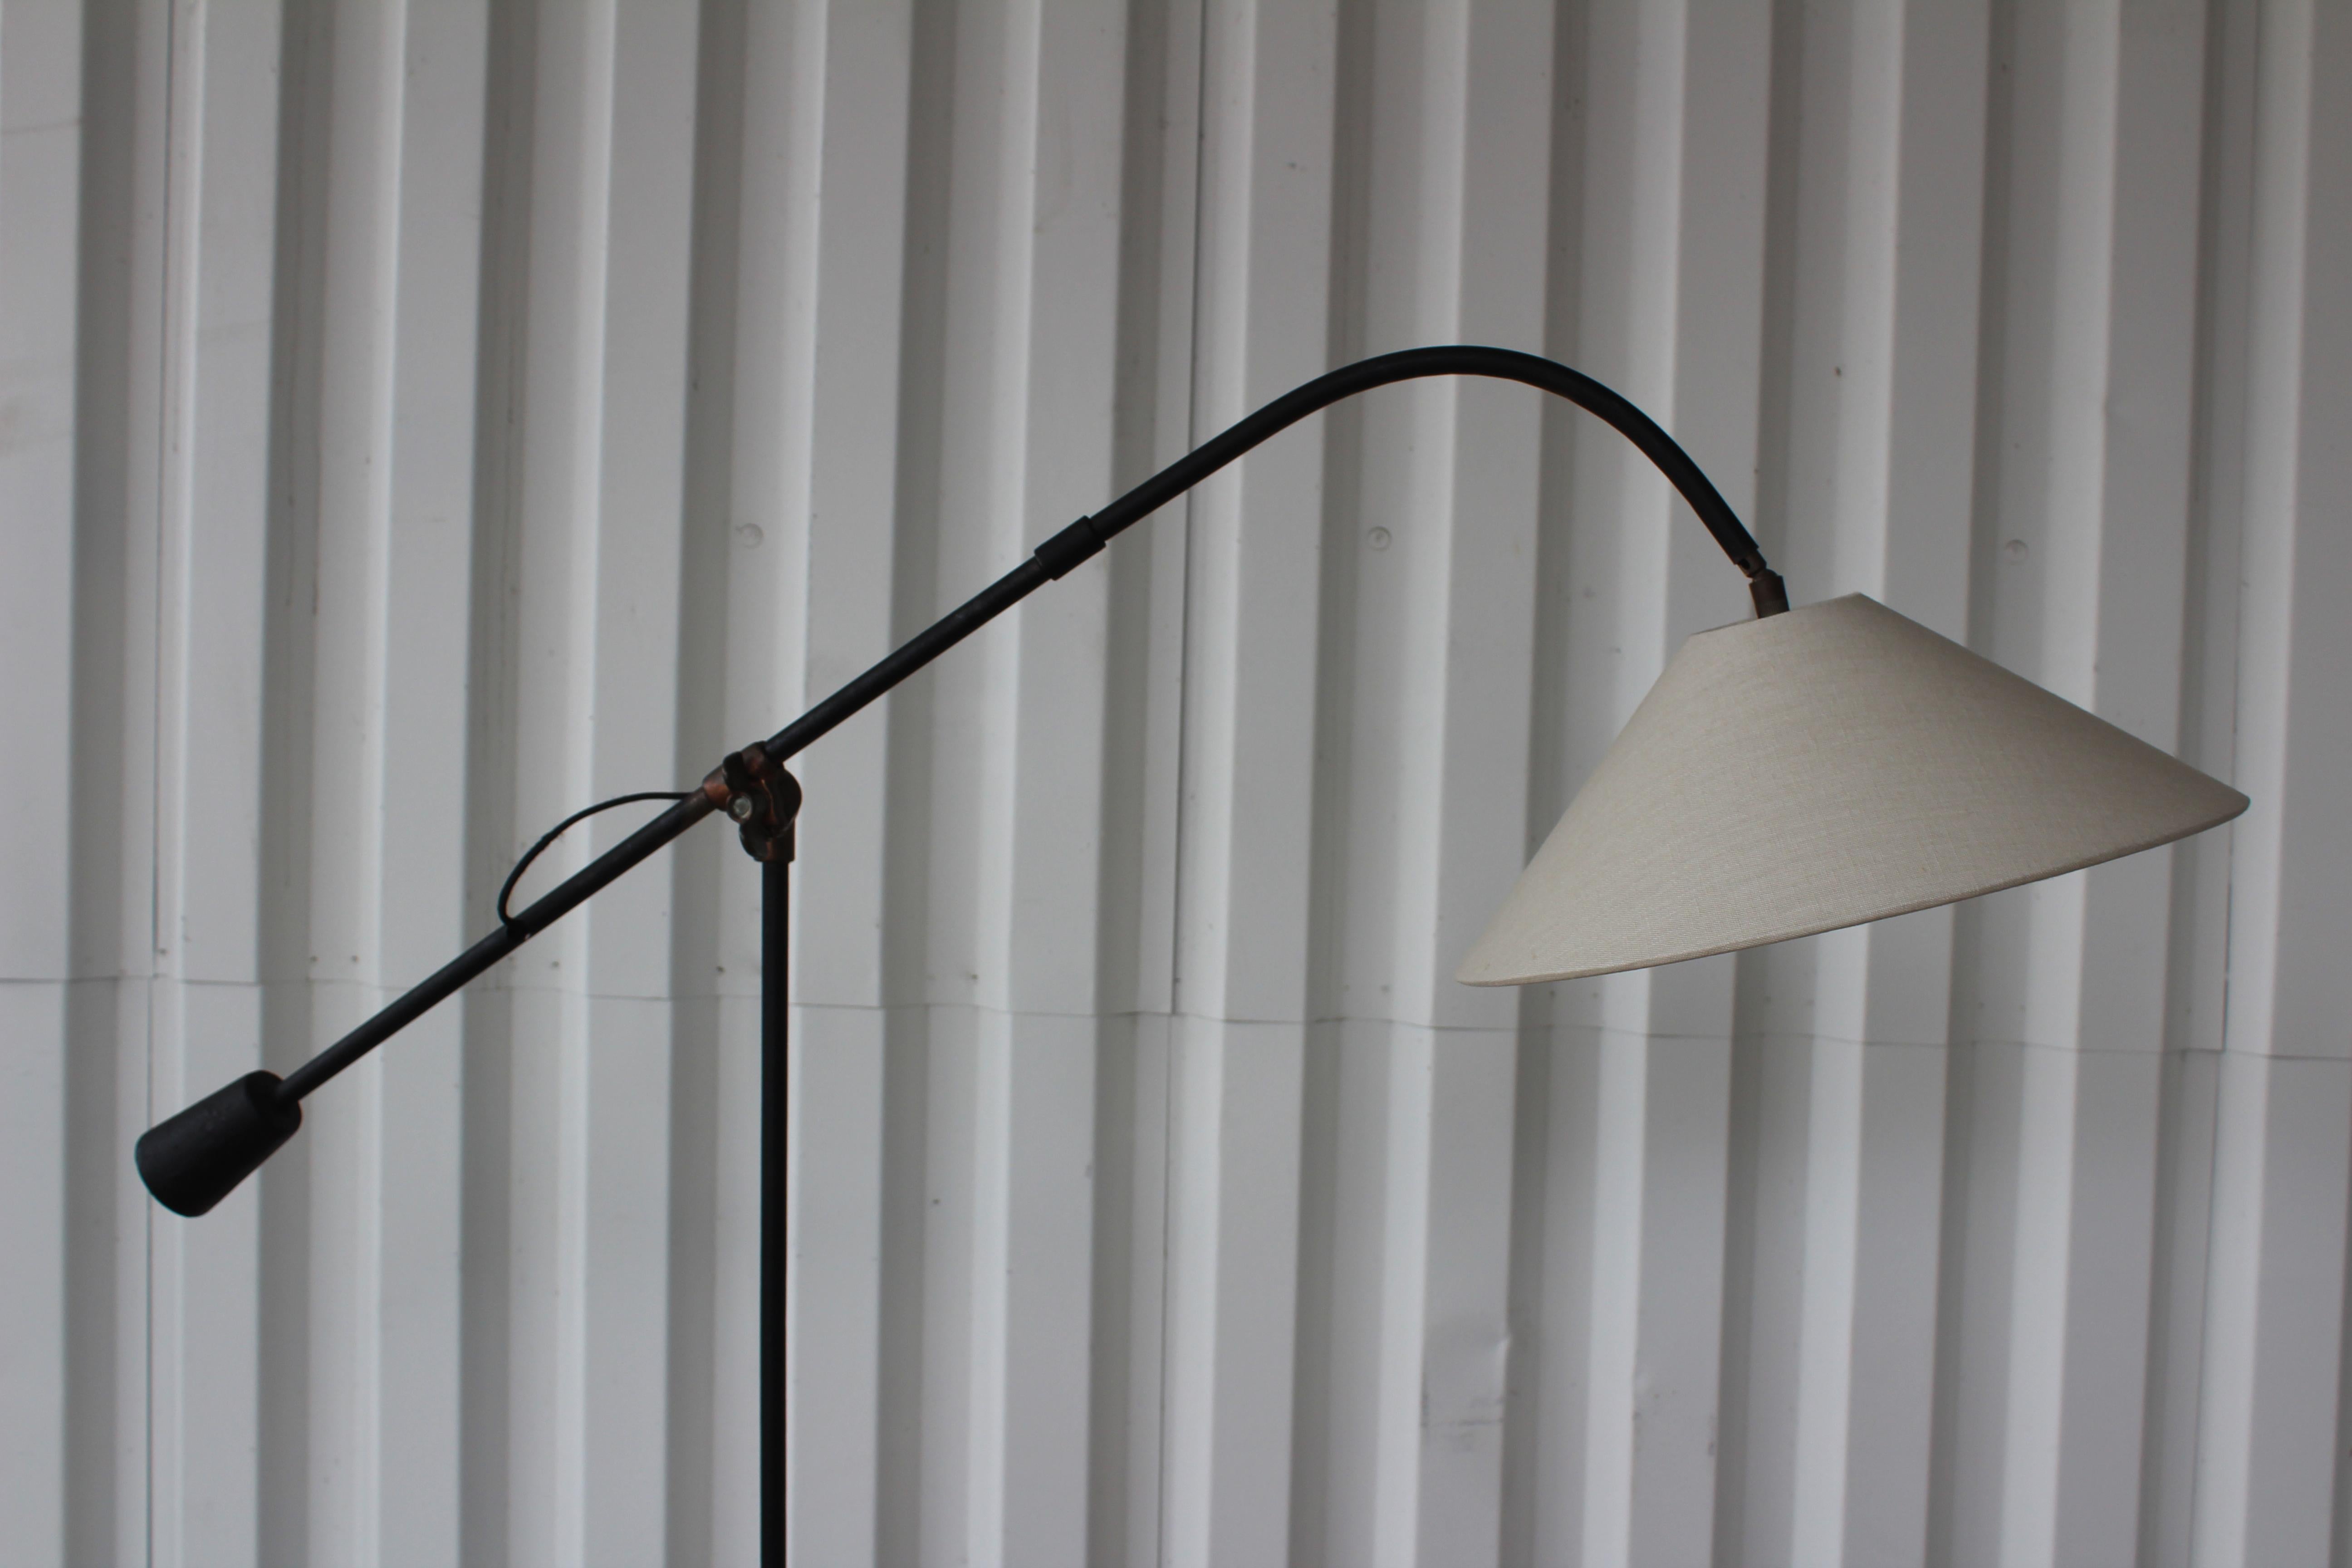 Vintage midcentury iron counter balance floor lamp, France, 1950s. Newly rewired and fitted with a custom made shade in off white linen. Iron shows age appropriate patina. Brass clamp allows the lamp to be adjusted.